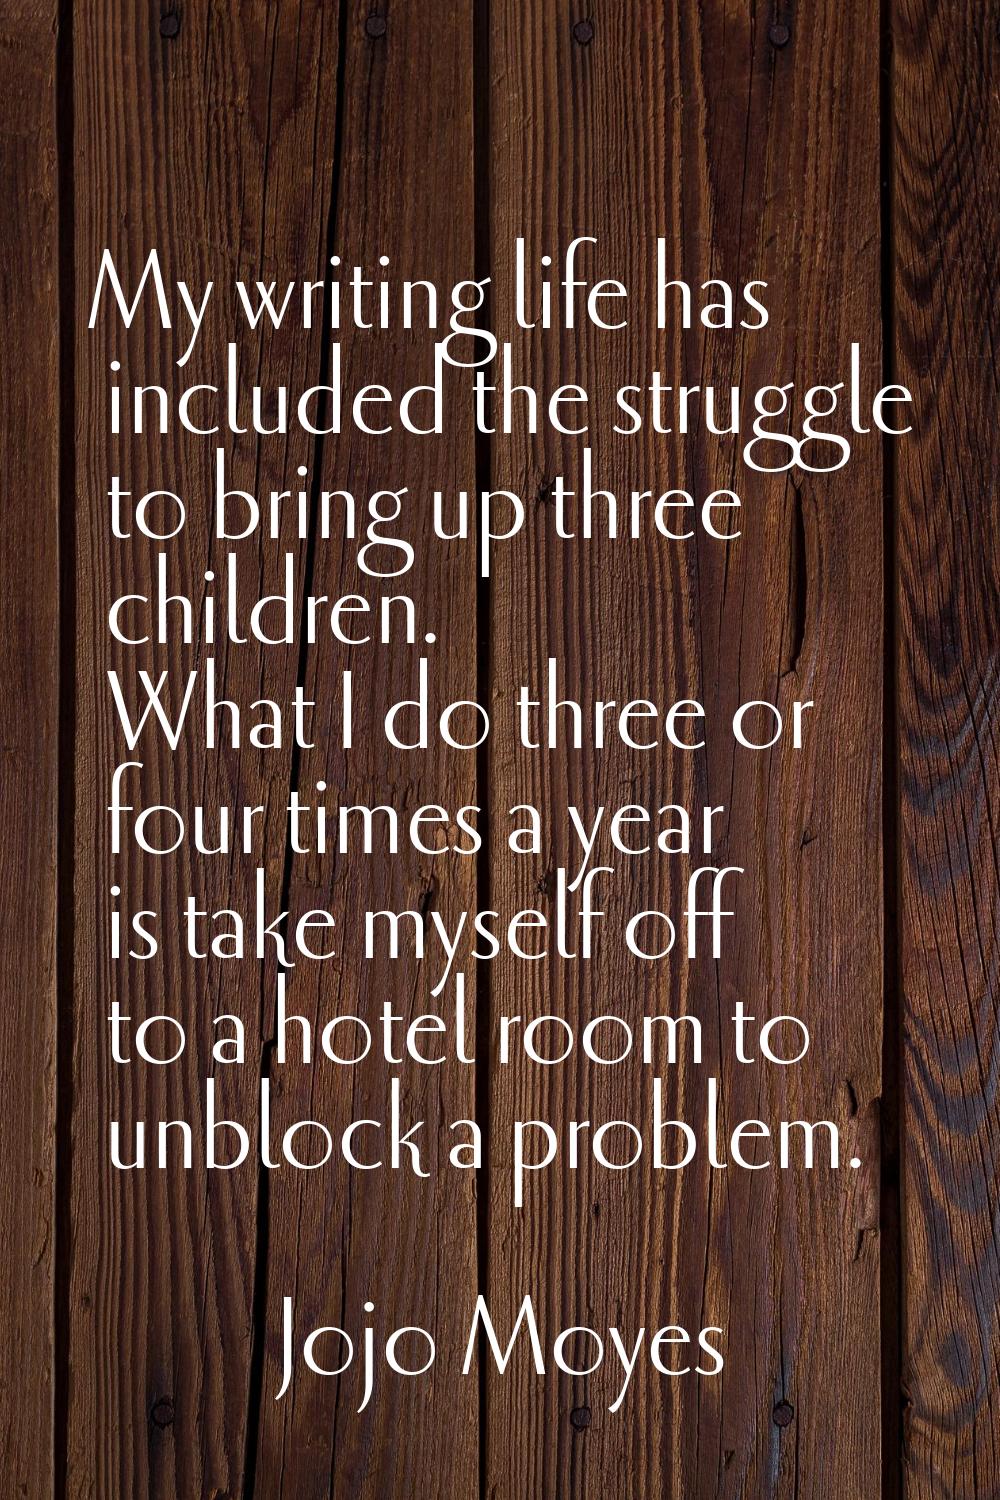 My writing life has included the struggle to bring up three children. What I do three or four times